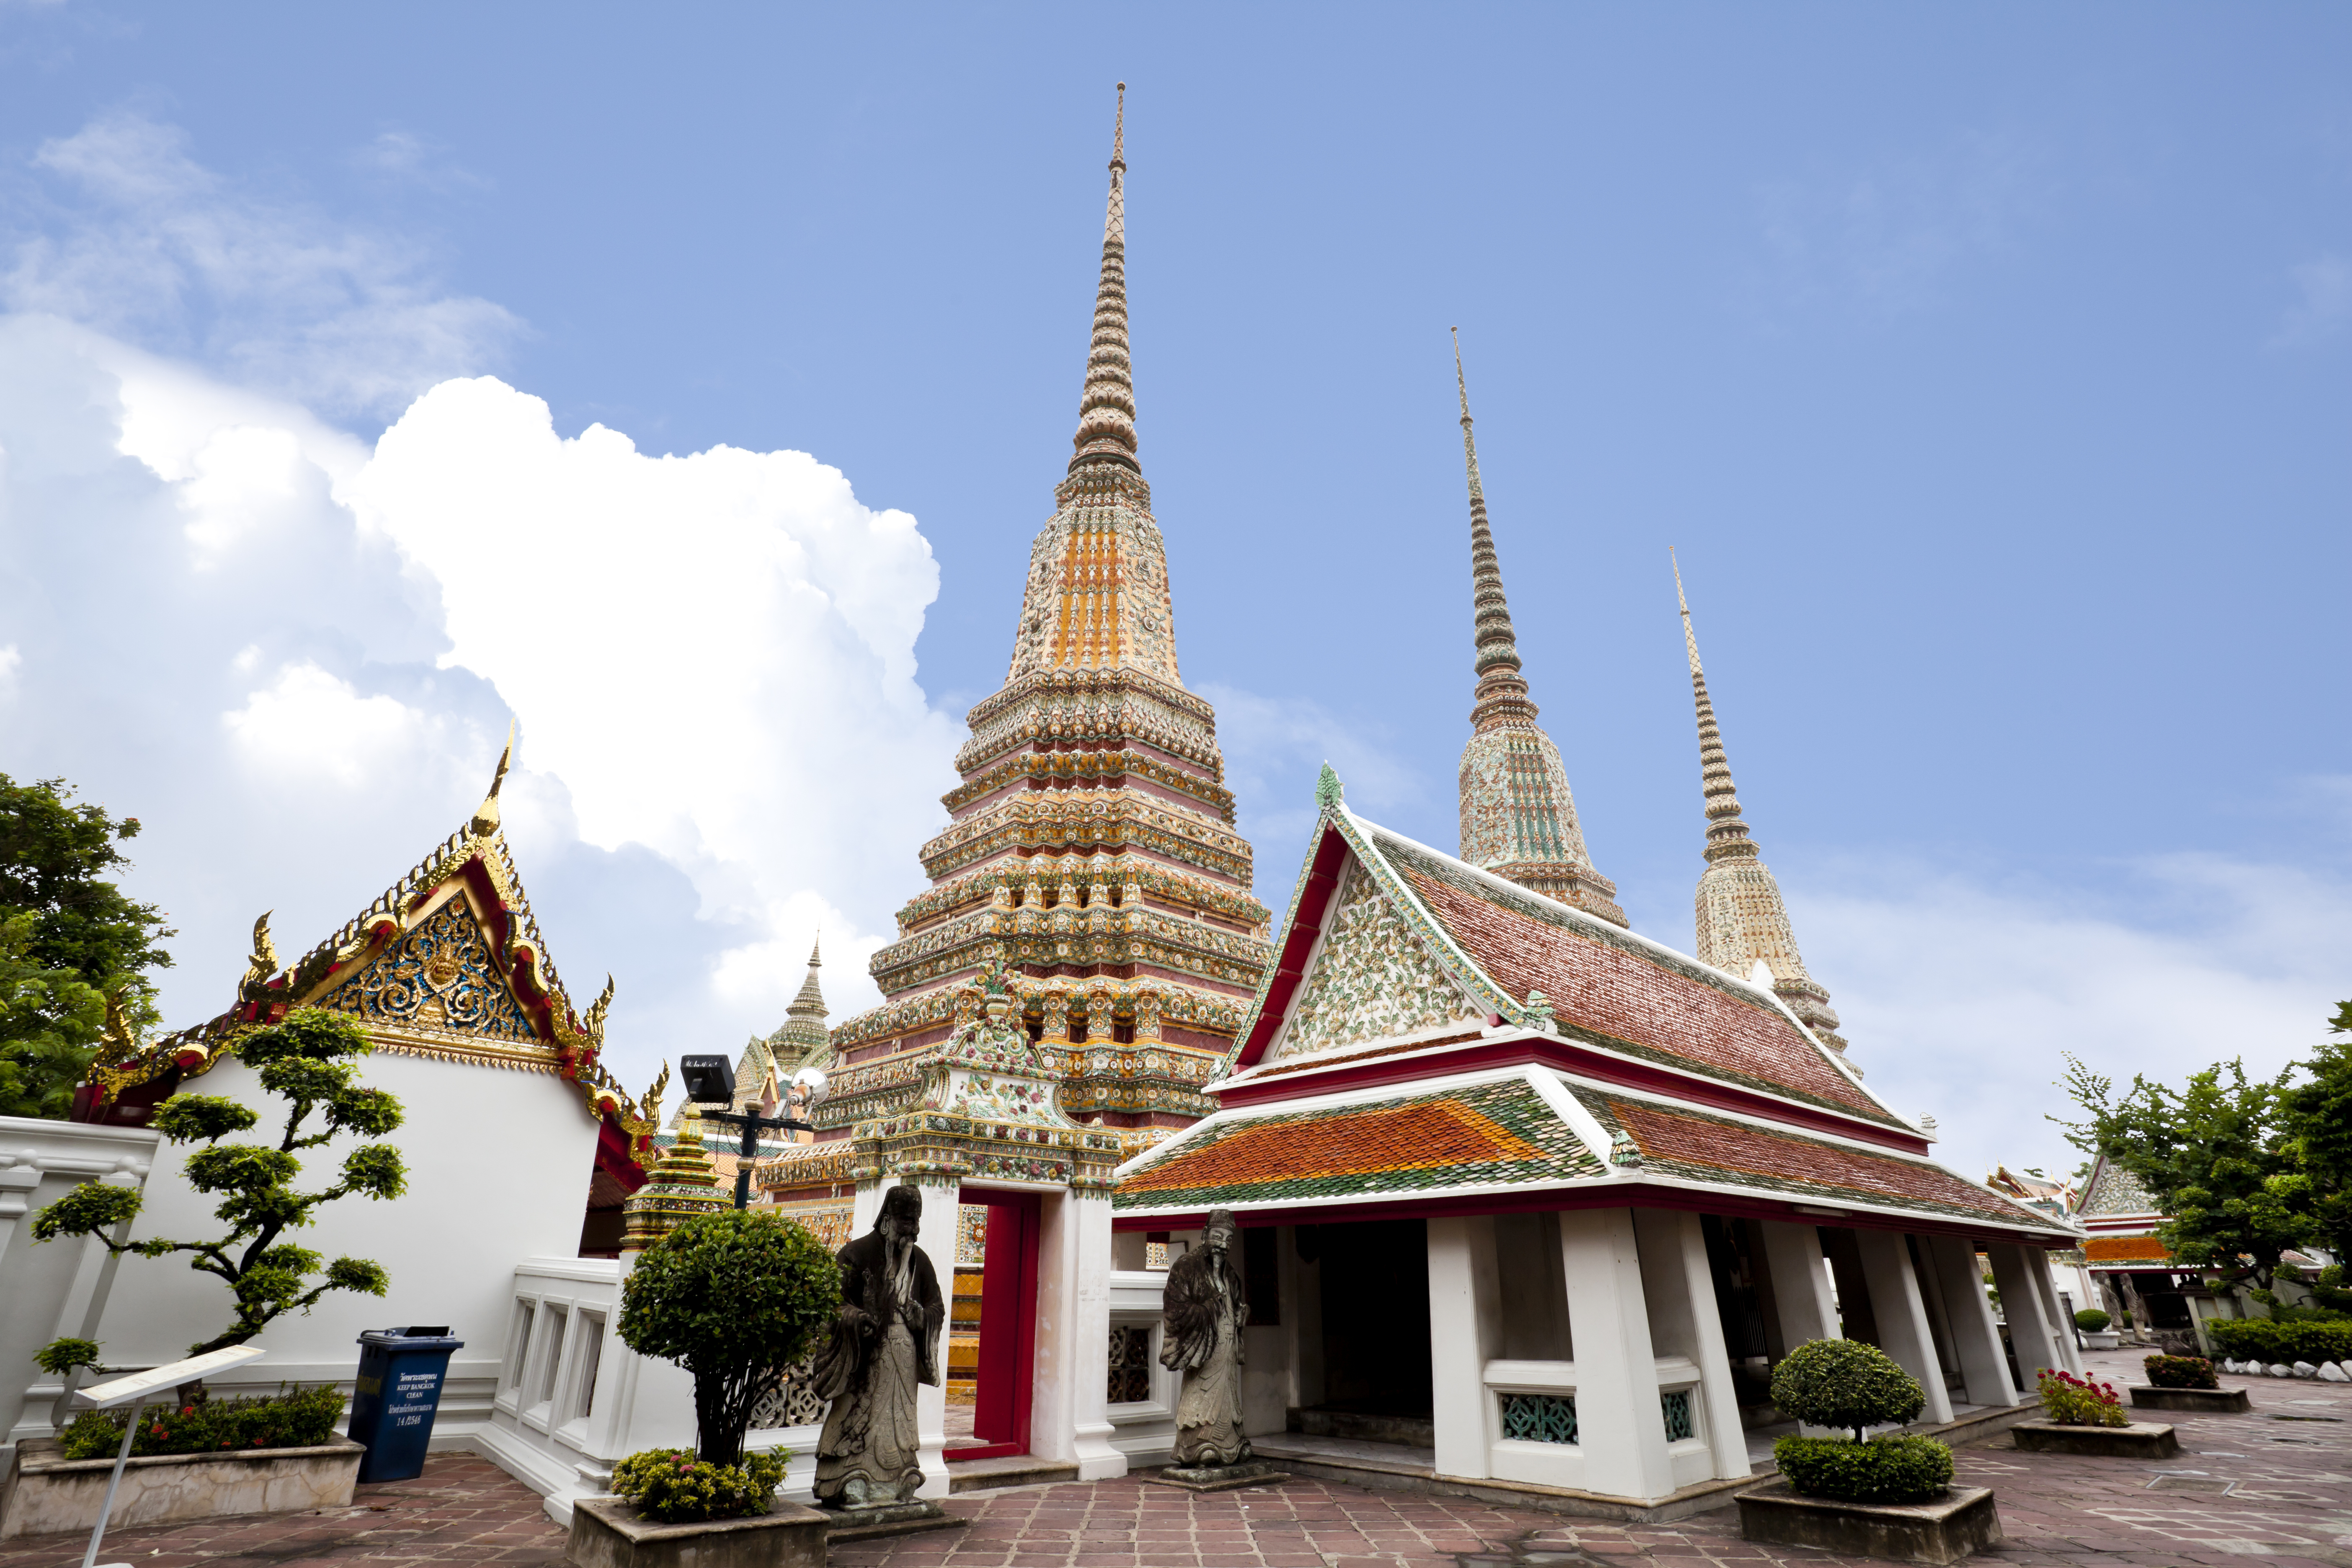 The golden stupas of Wat Pho sit quiet and in peace against the piercing blue skies of Bangkok, Thailand